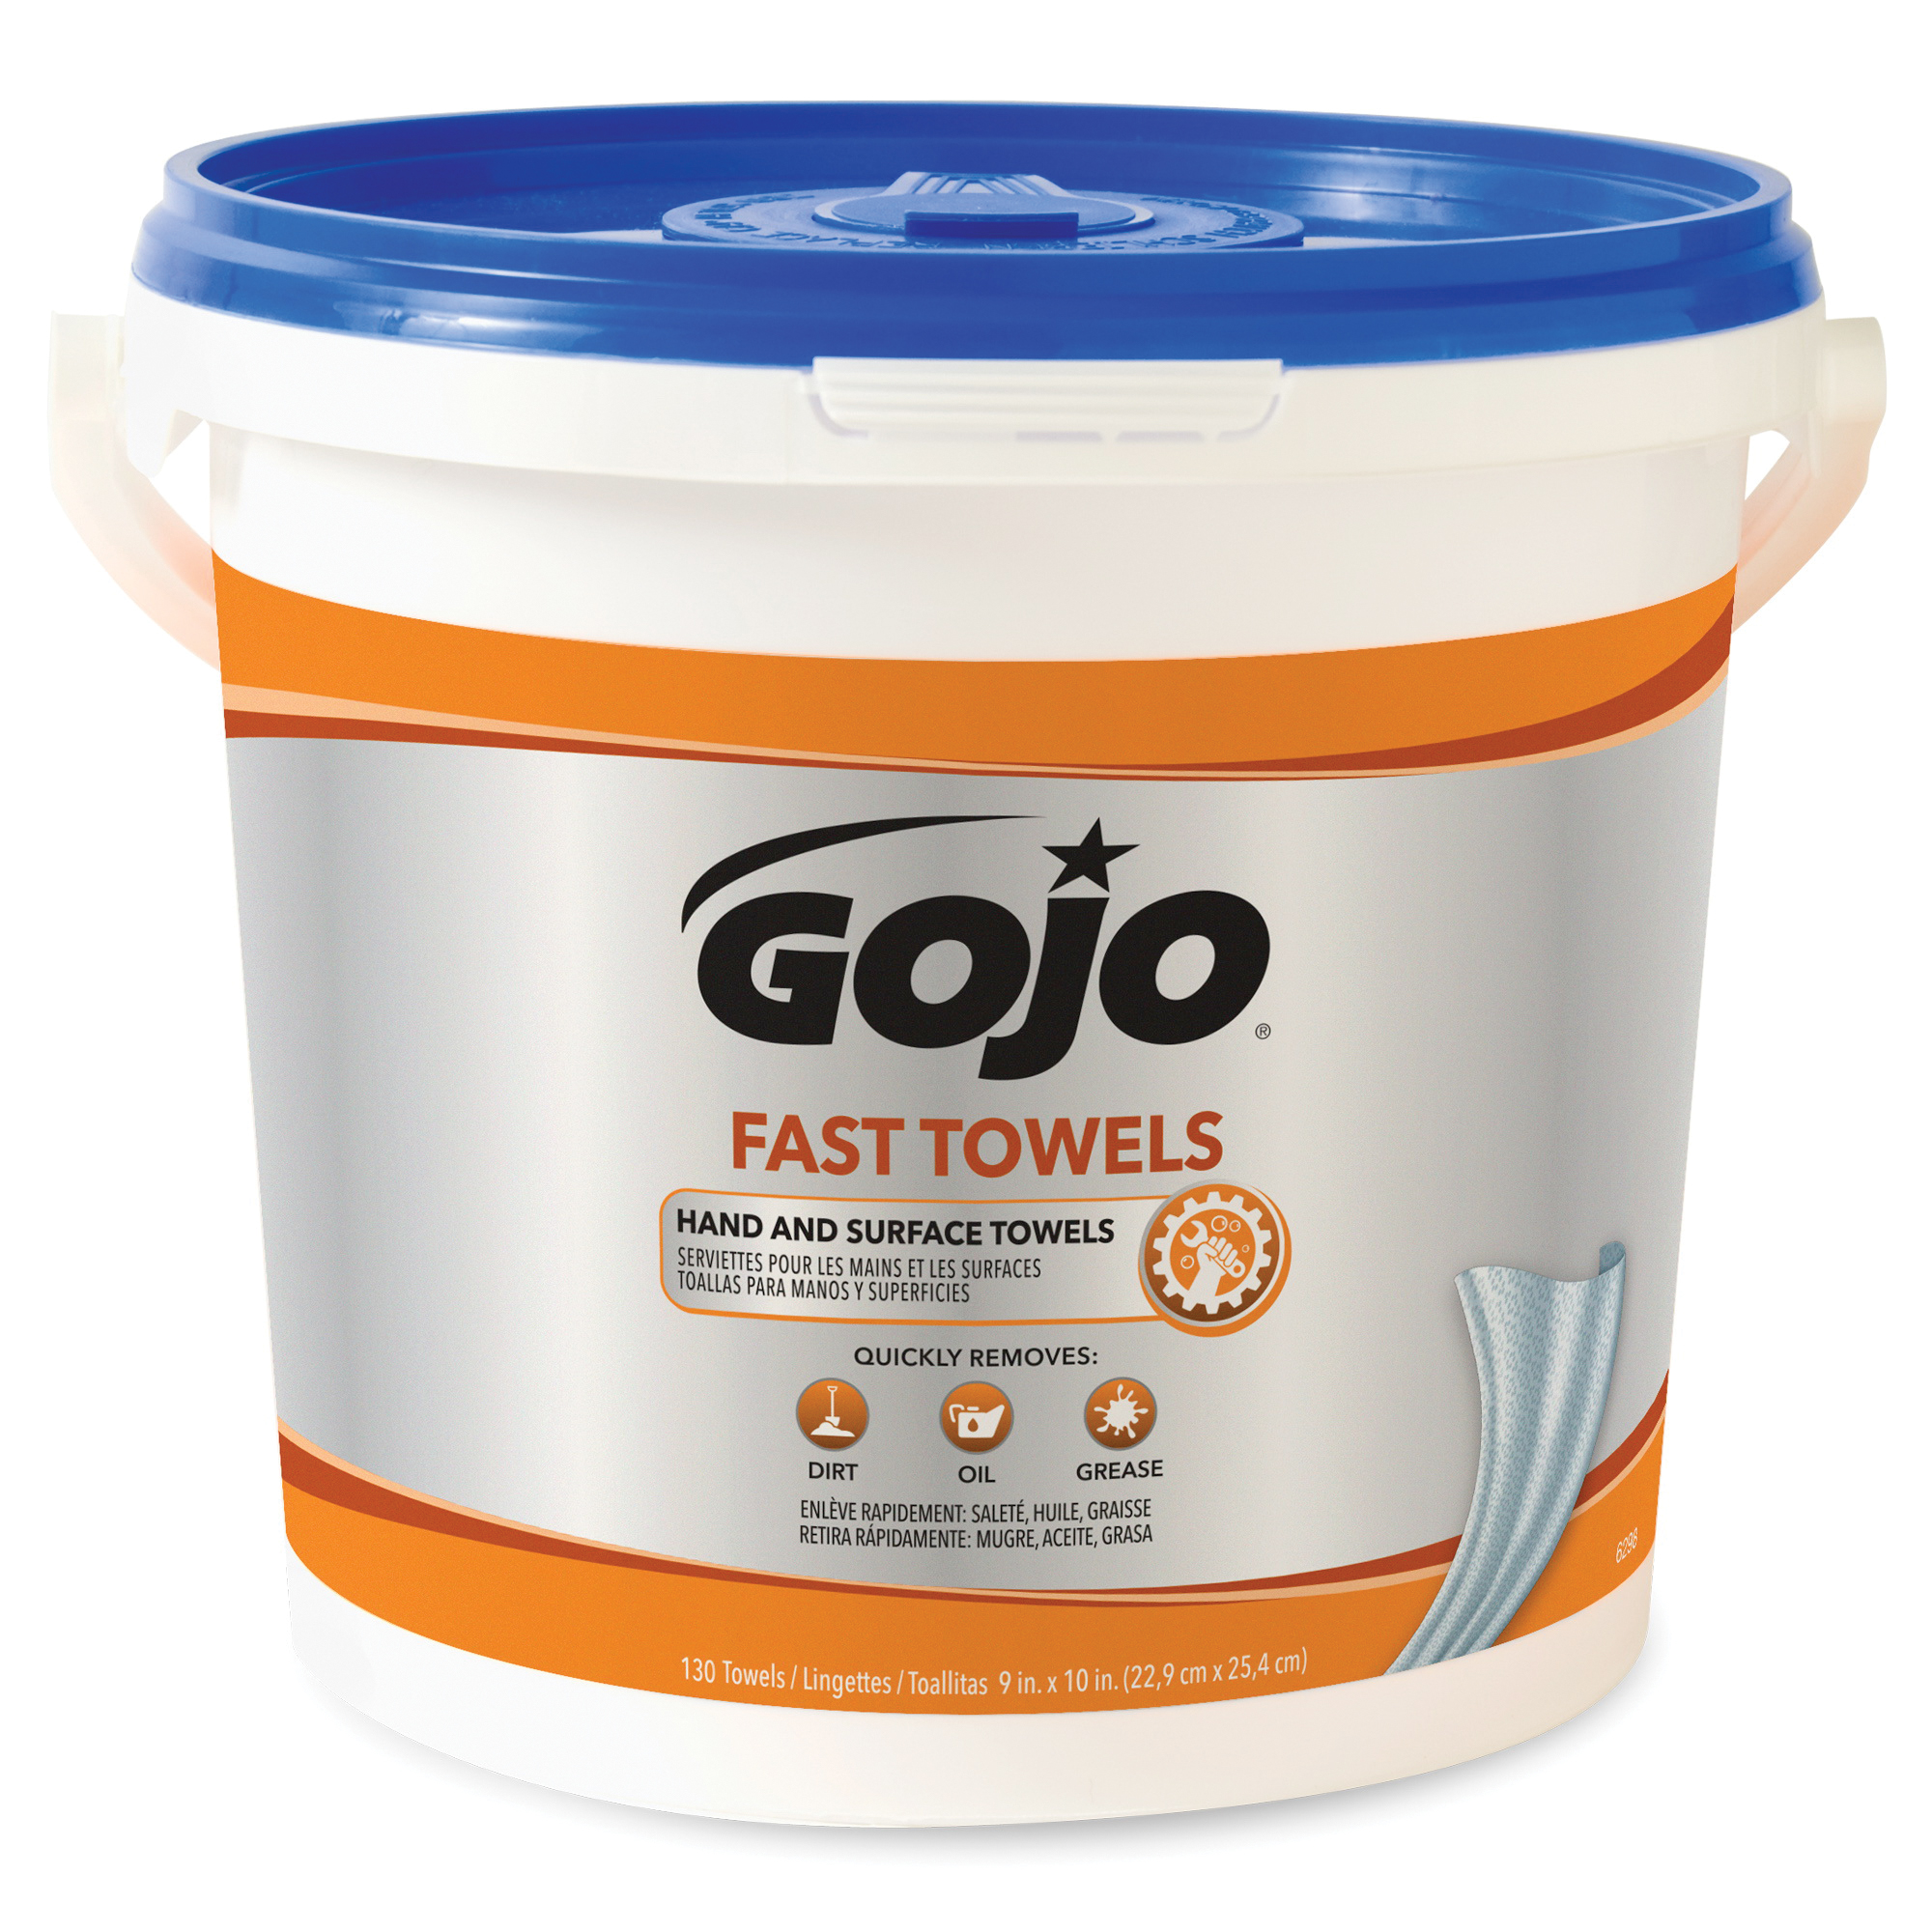 GOJO wipes away tough soils with product launch - Professional Builder